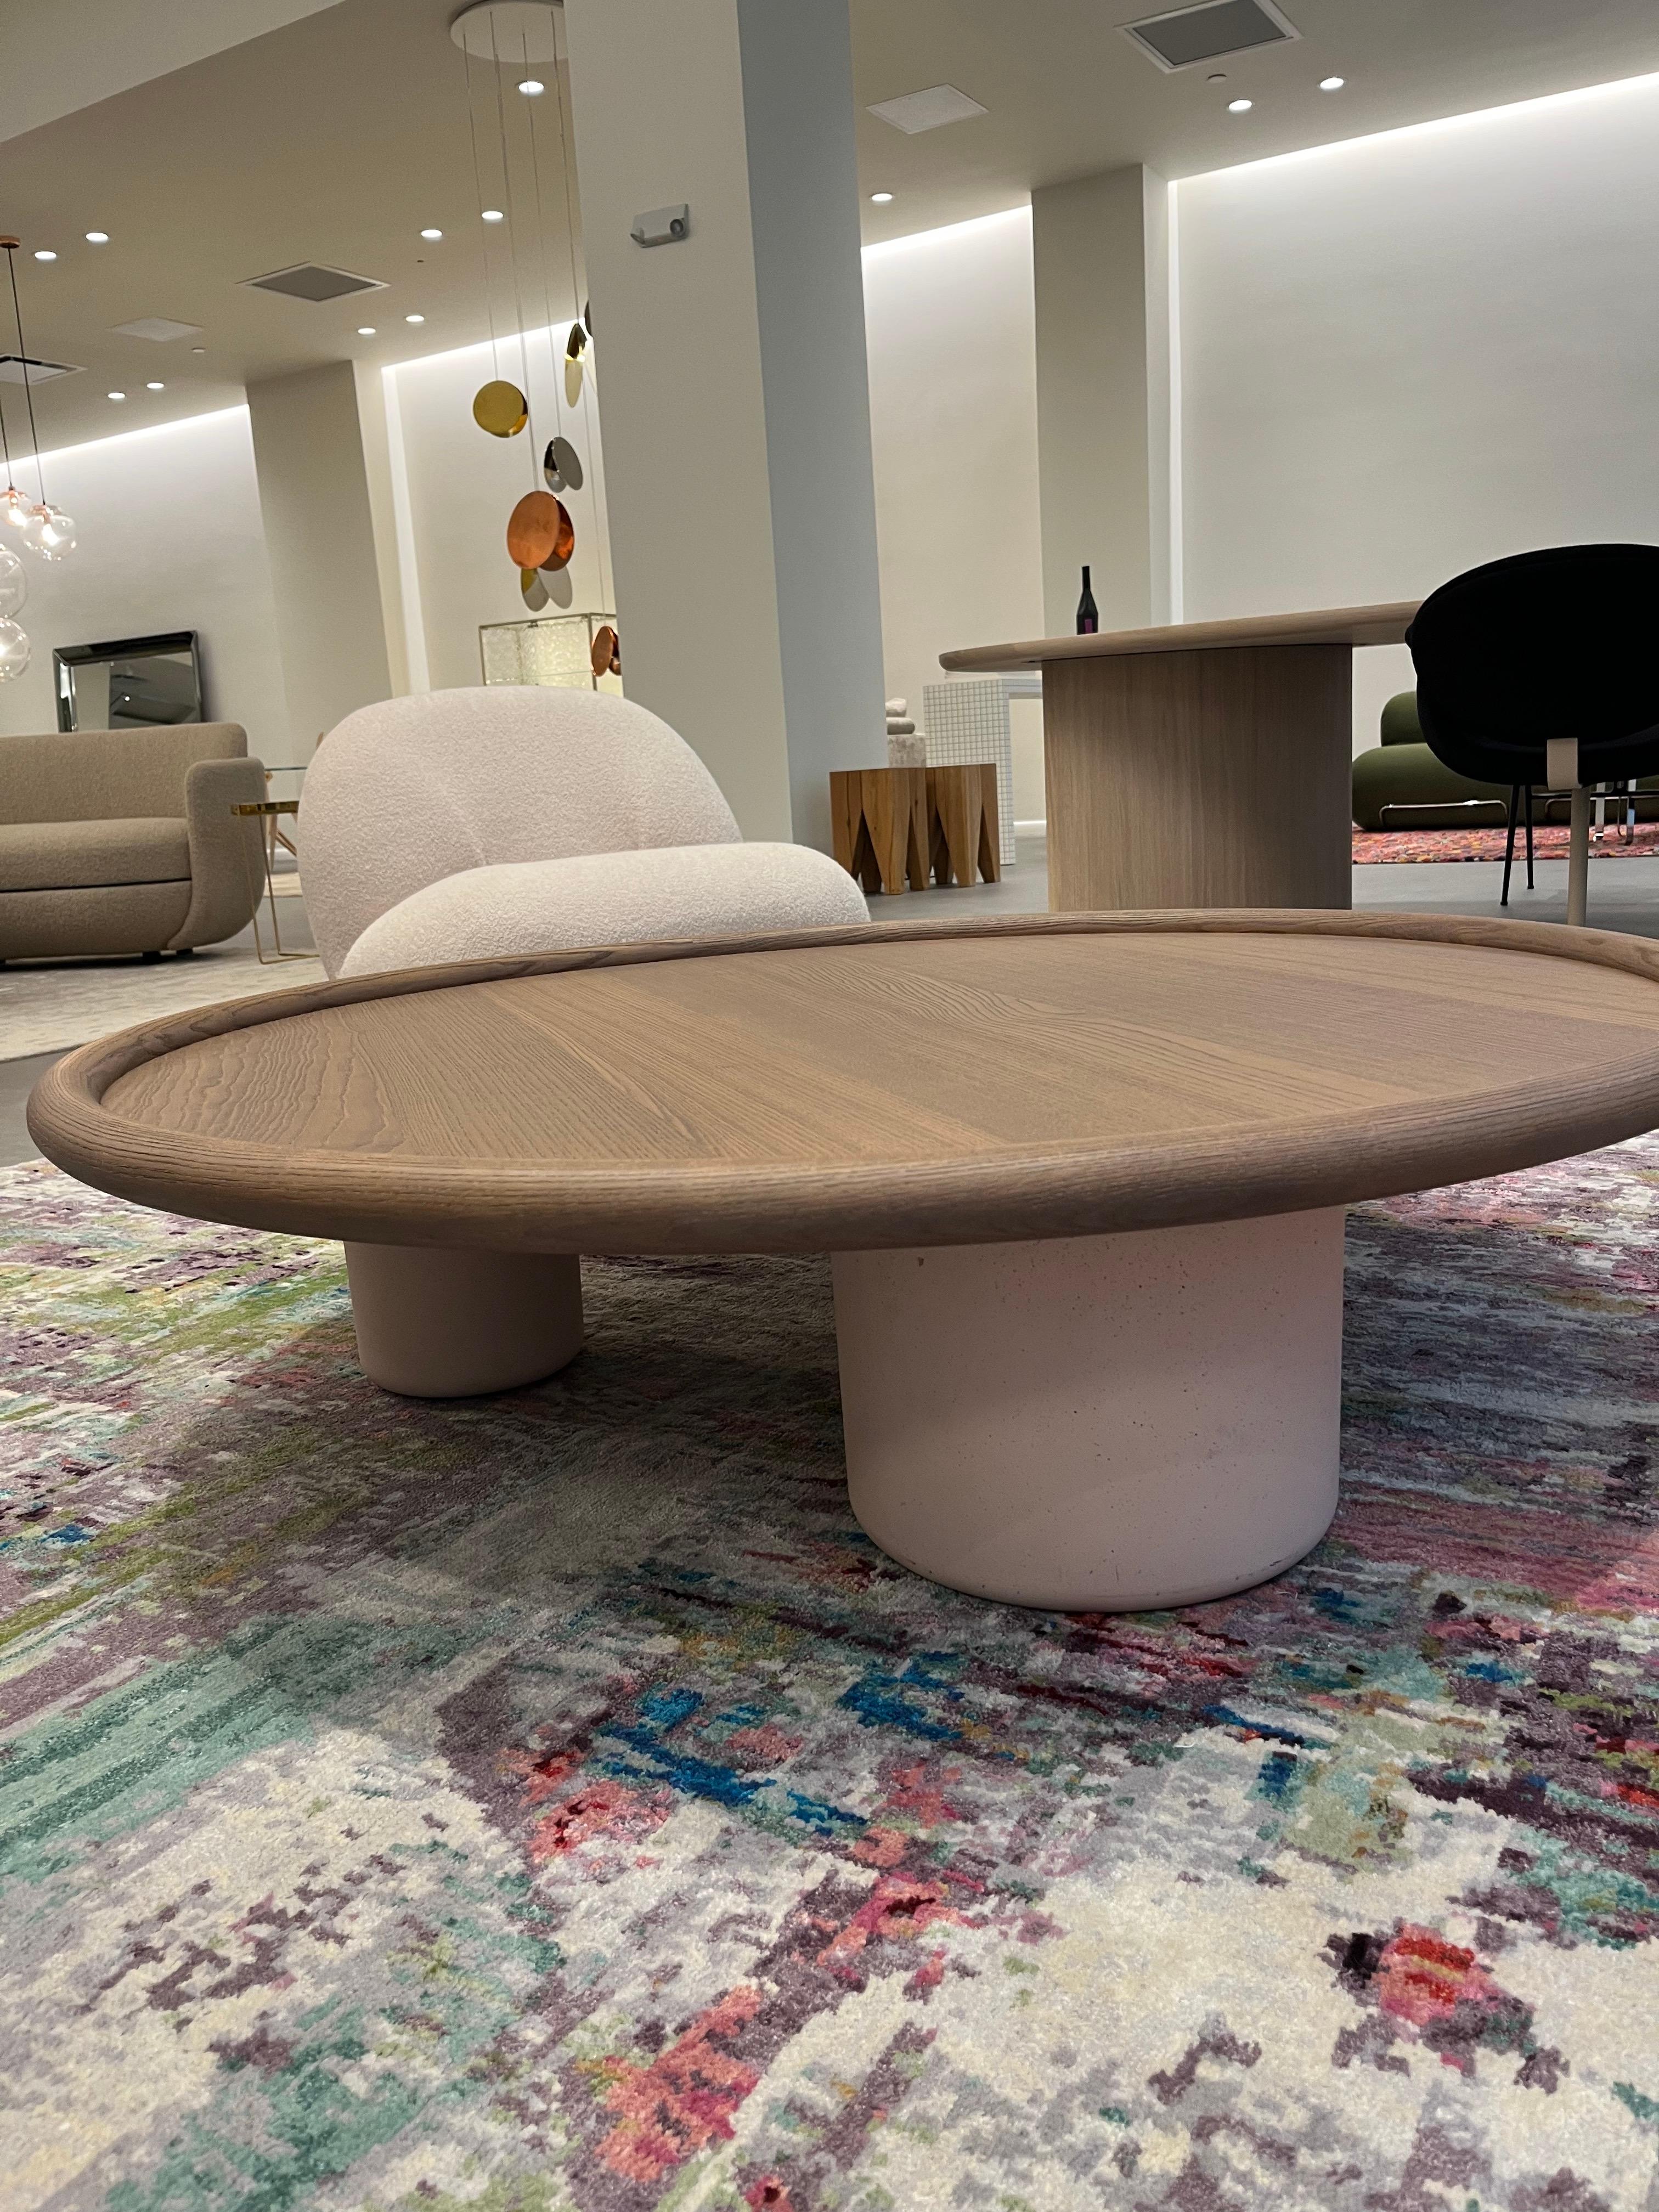 IN STOCK -  
TOP WALNUT T134 
BASE Pink Cement 
Designed by Studiopepe, the Pluto coffee tables are essentially sculptural shapes and bold details that call to mind cubism. Available in two sizes, the coffee tables comprise a solid wood tabletop